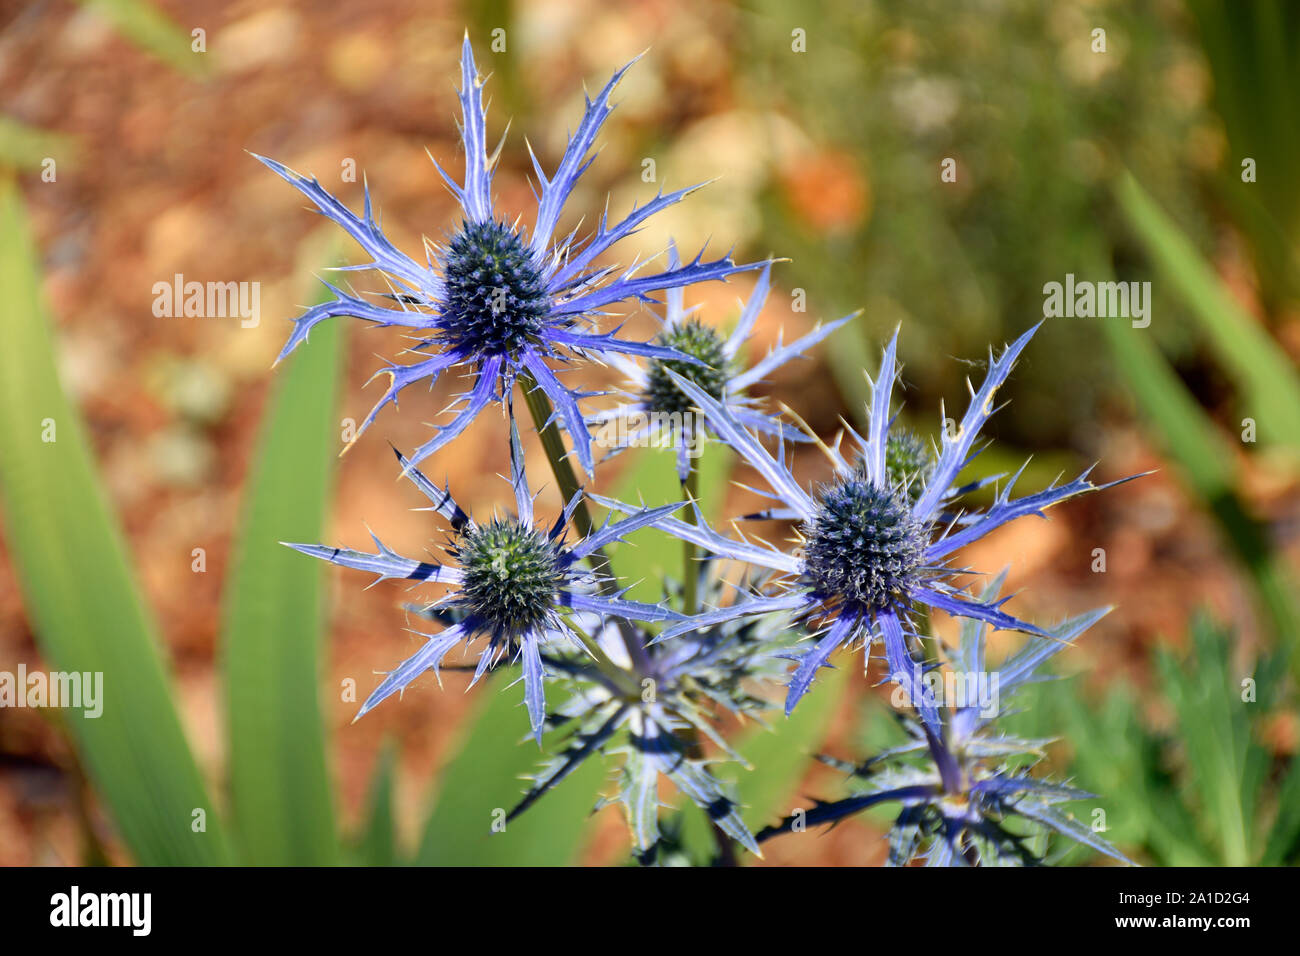 Blue Star Sea Holly Also Called Eryngium Alpinum From New Mexico Stock Photo Alamy